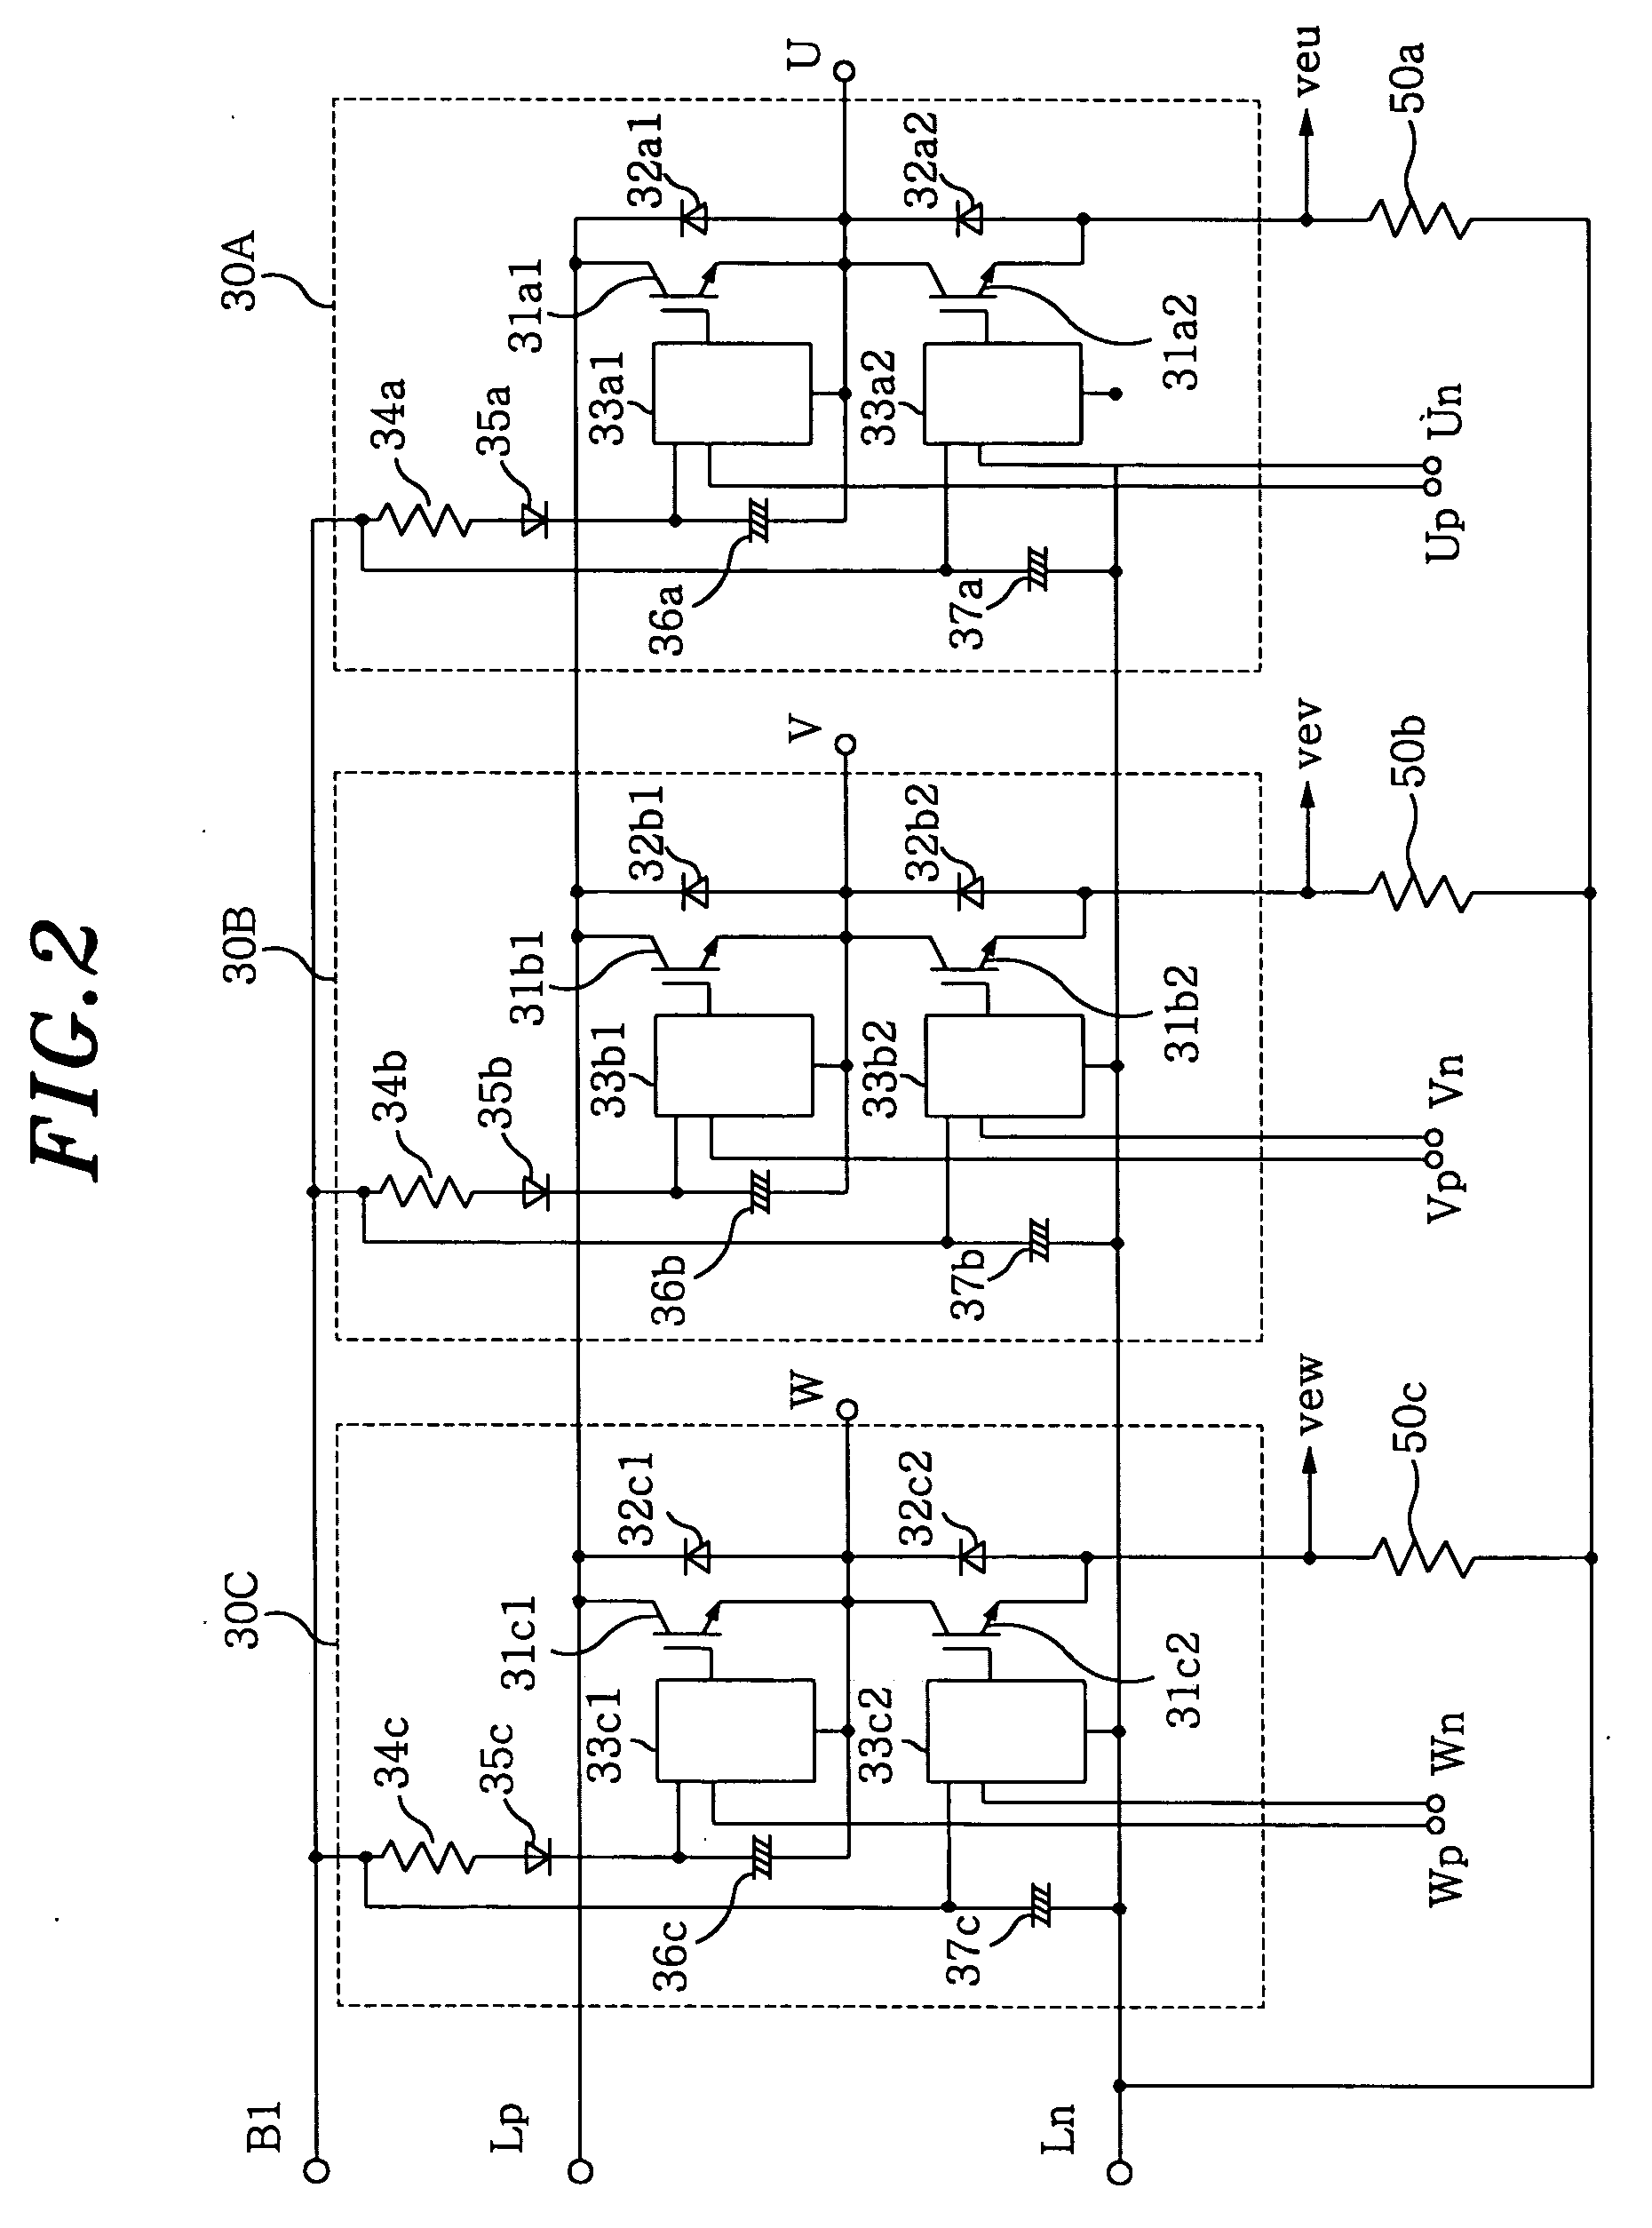 Motor driving apparatus for use in a diswasher